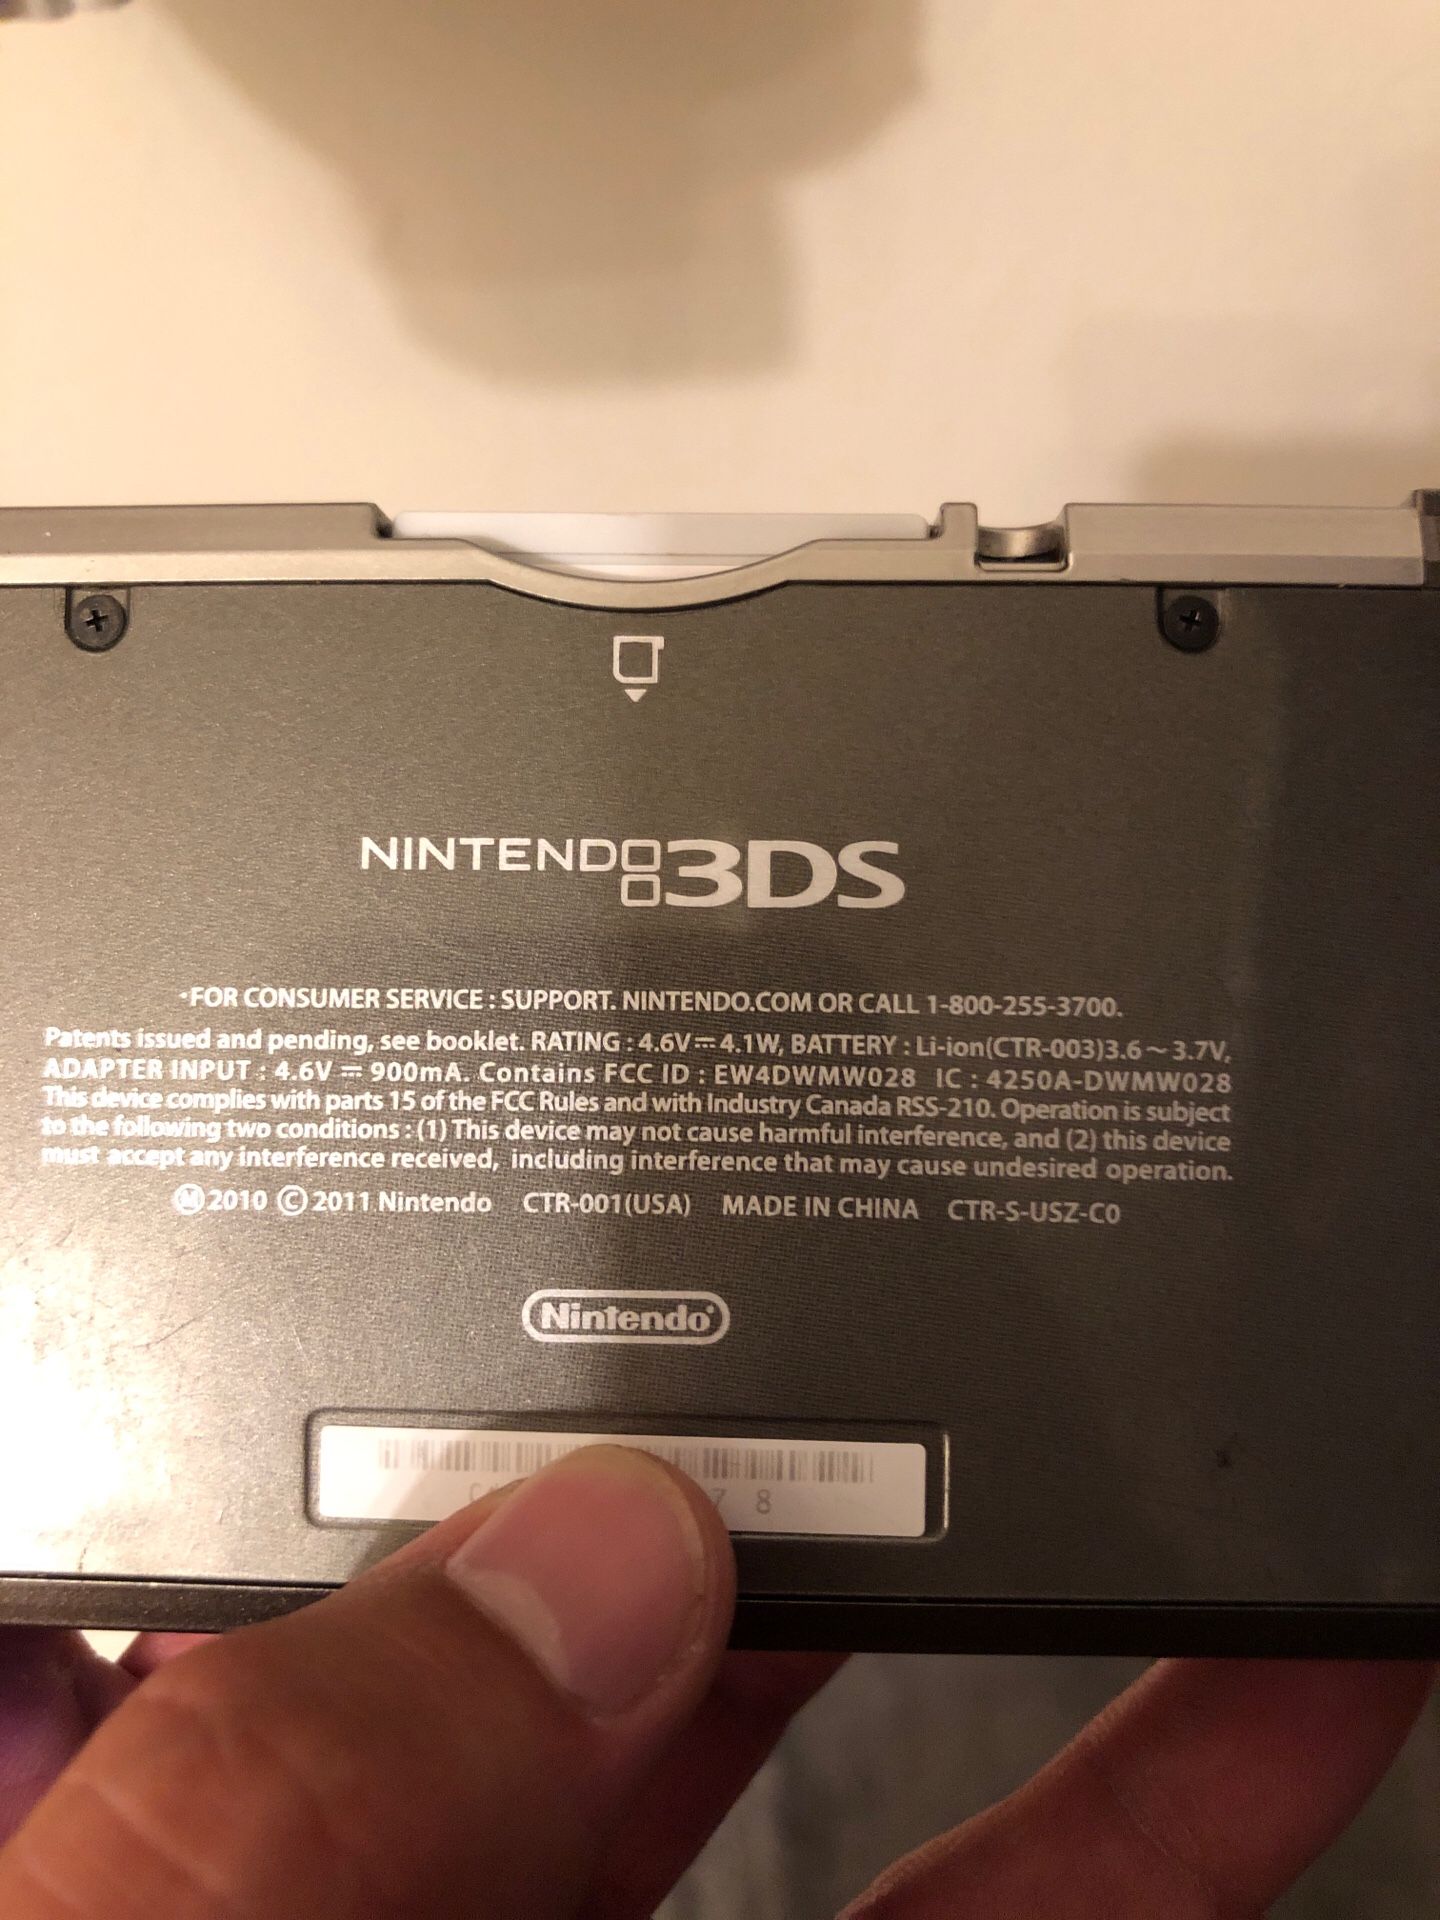 Nintendo 3ds for sale. Works and comes with game